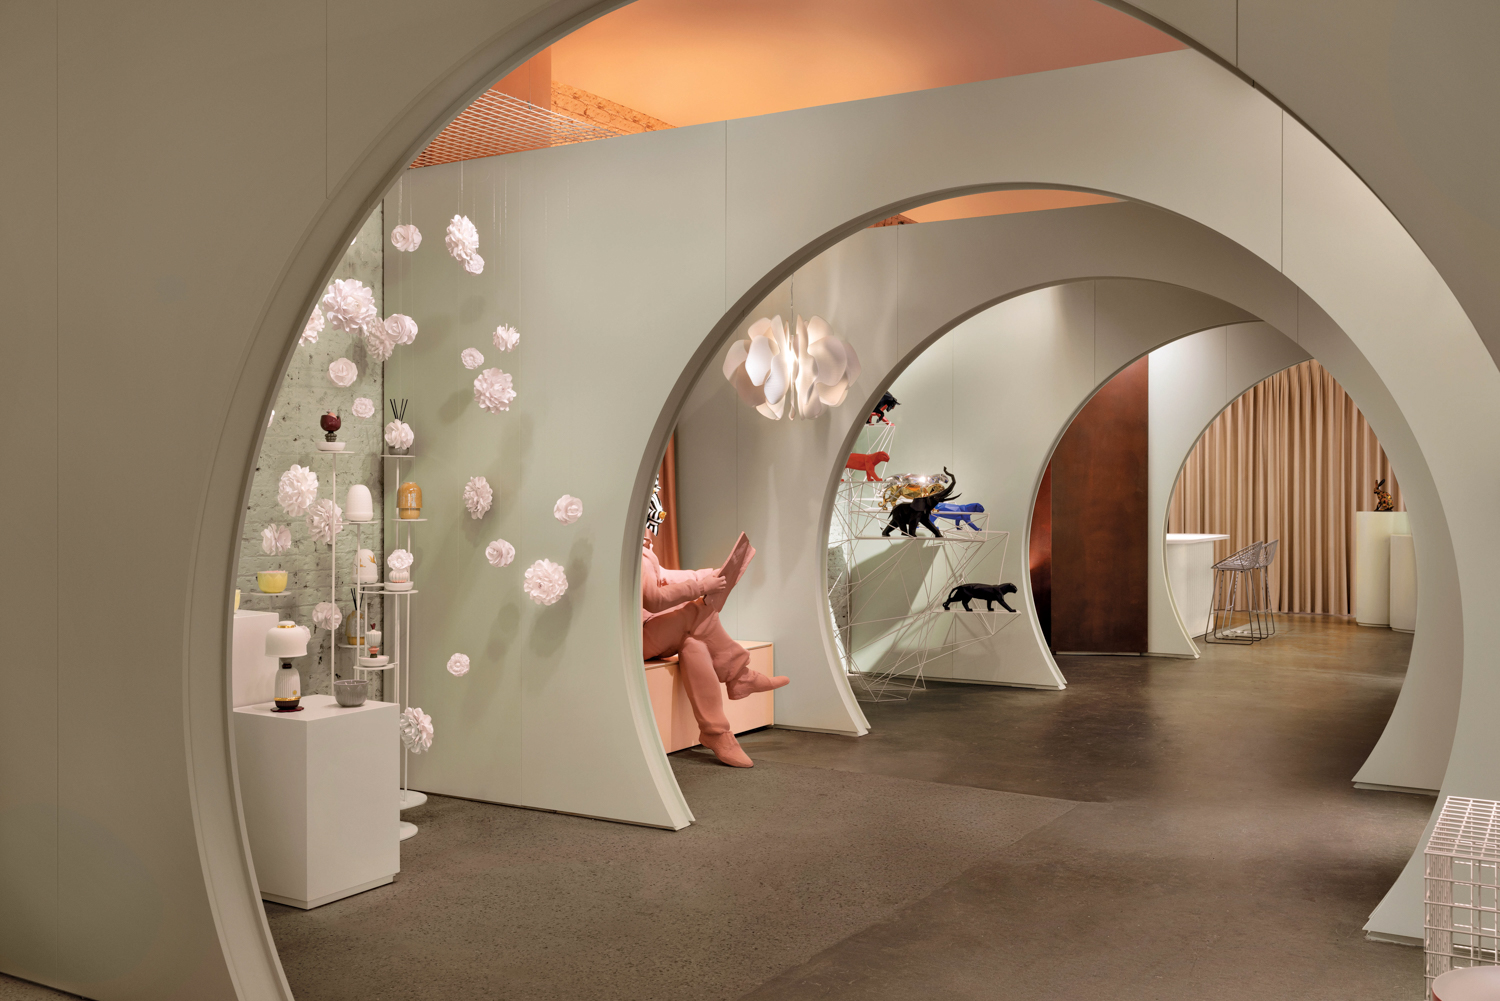 Lladro store interior with porcelain figurines on display on the sides of circle-shaped arches